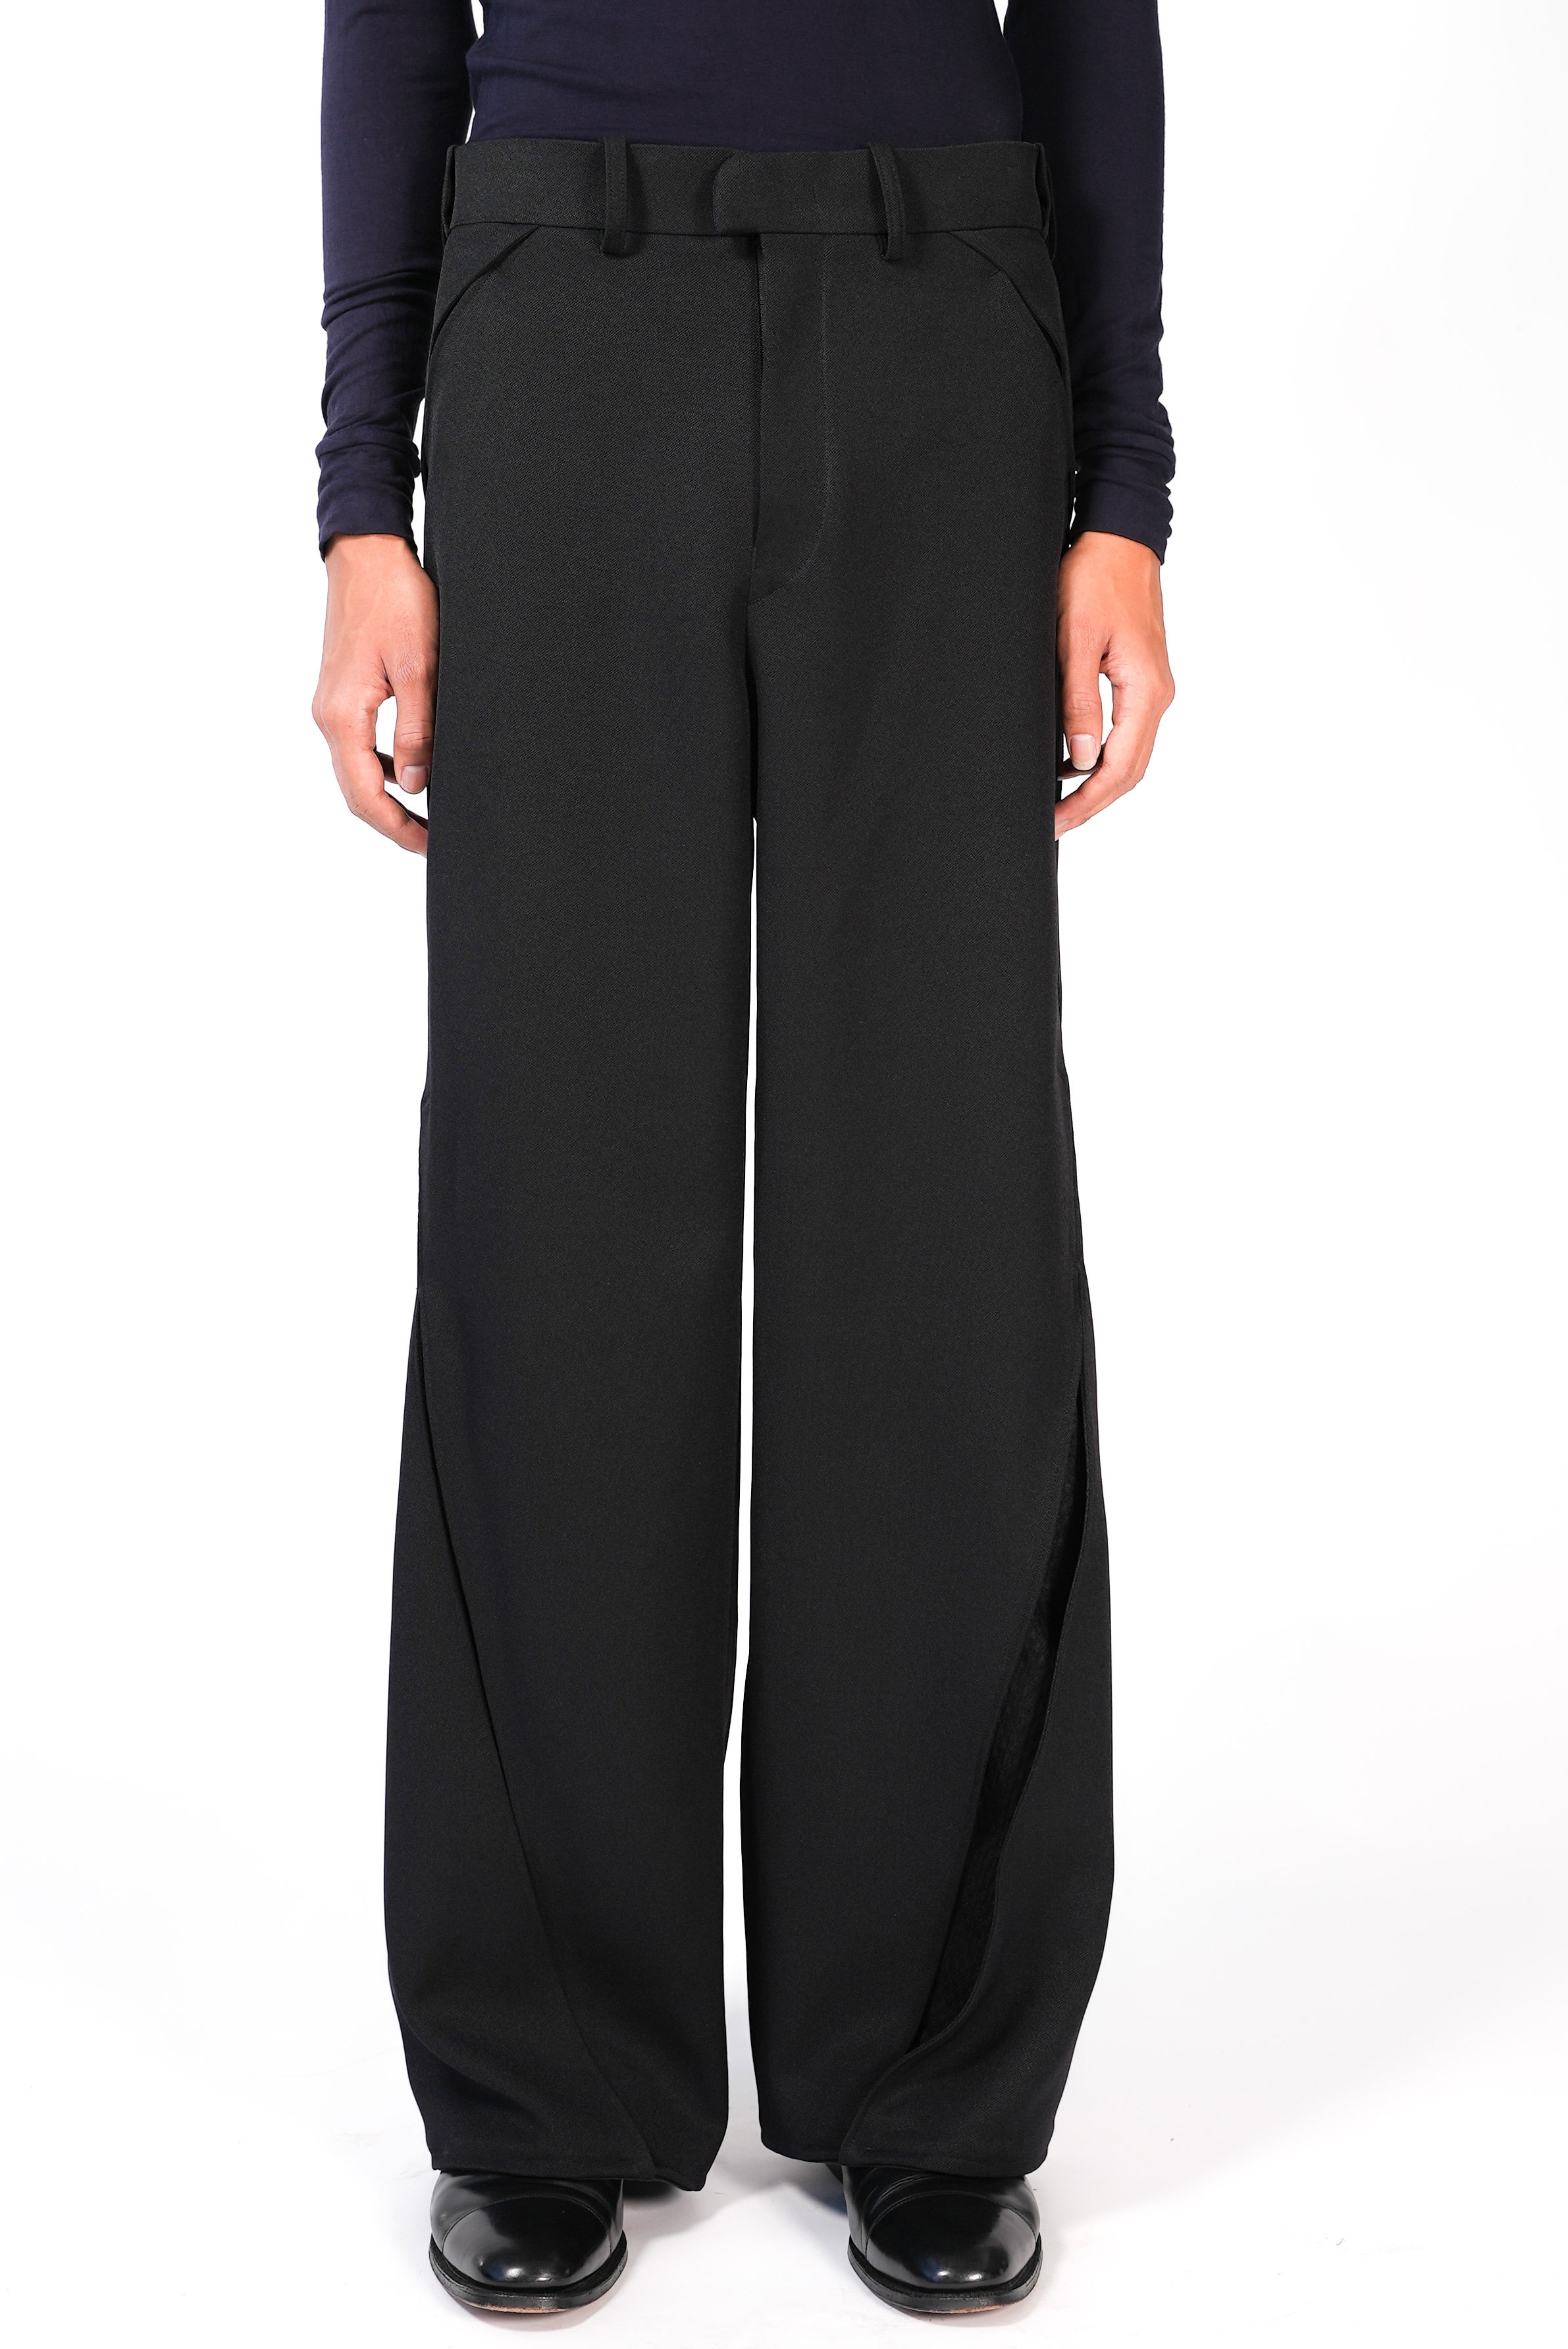 STRONG003 TROUSERS (BLACK)